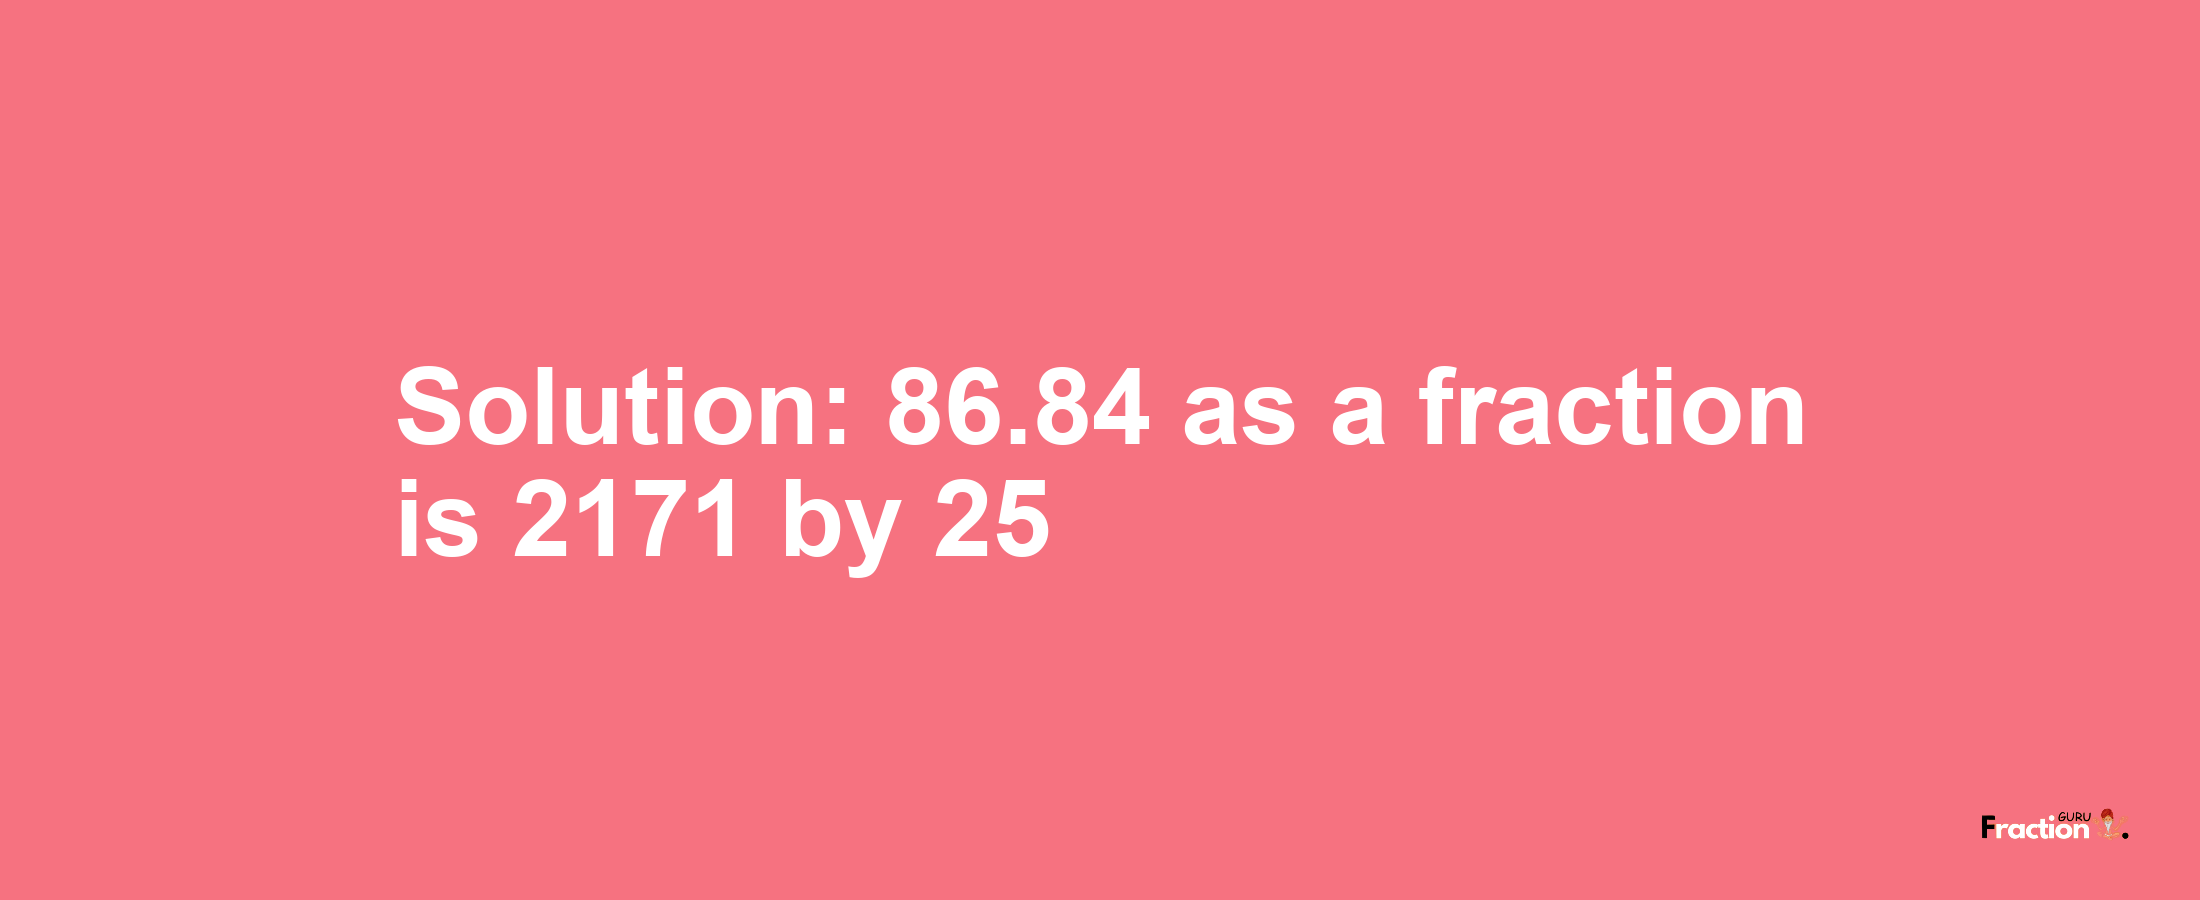 Solution:86.84 as a fraction is 2171/25